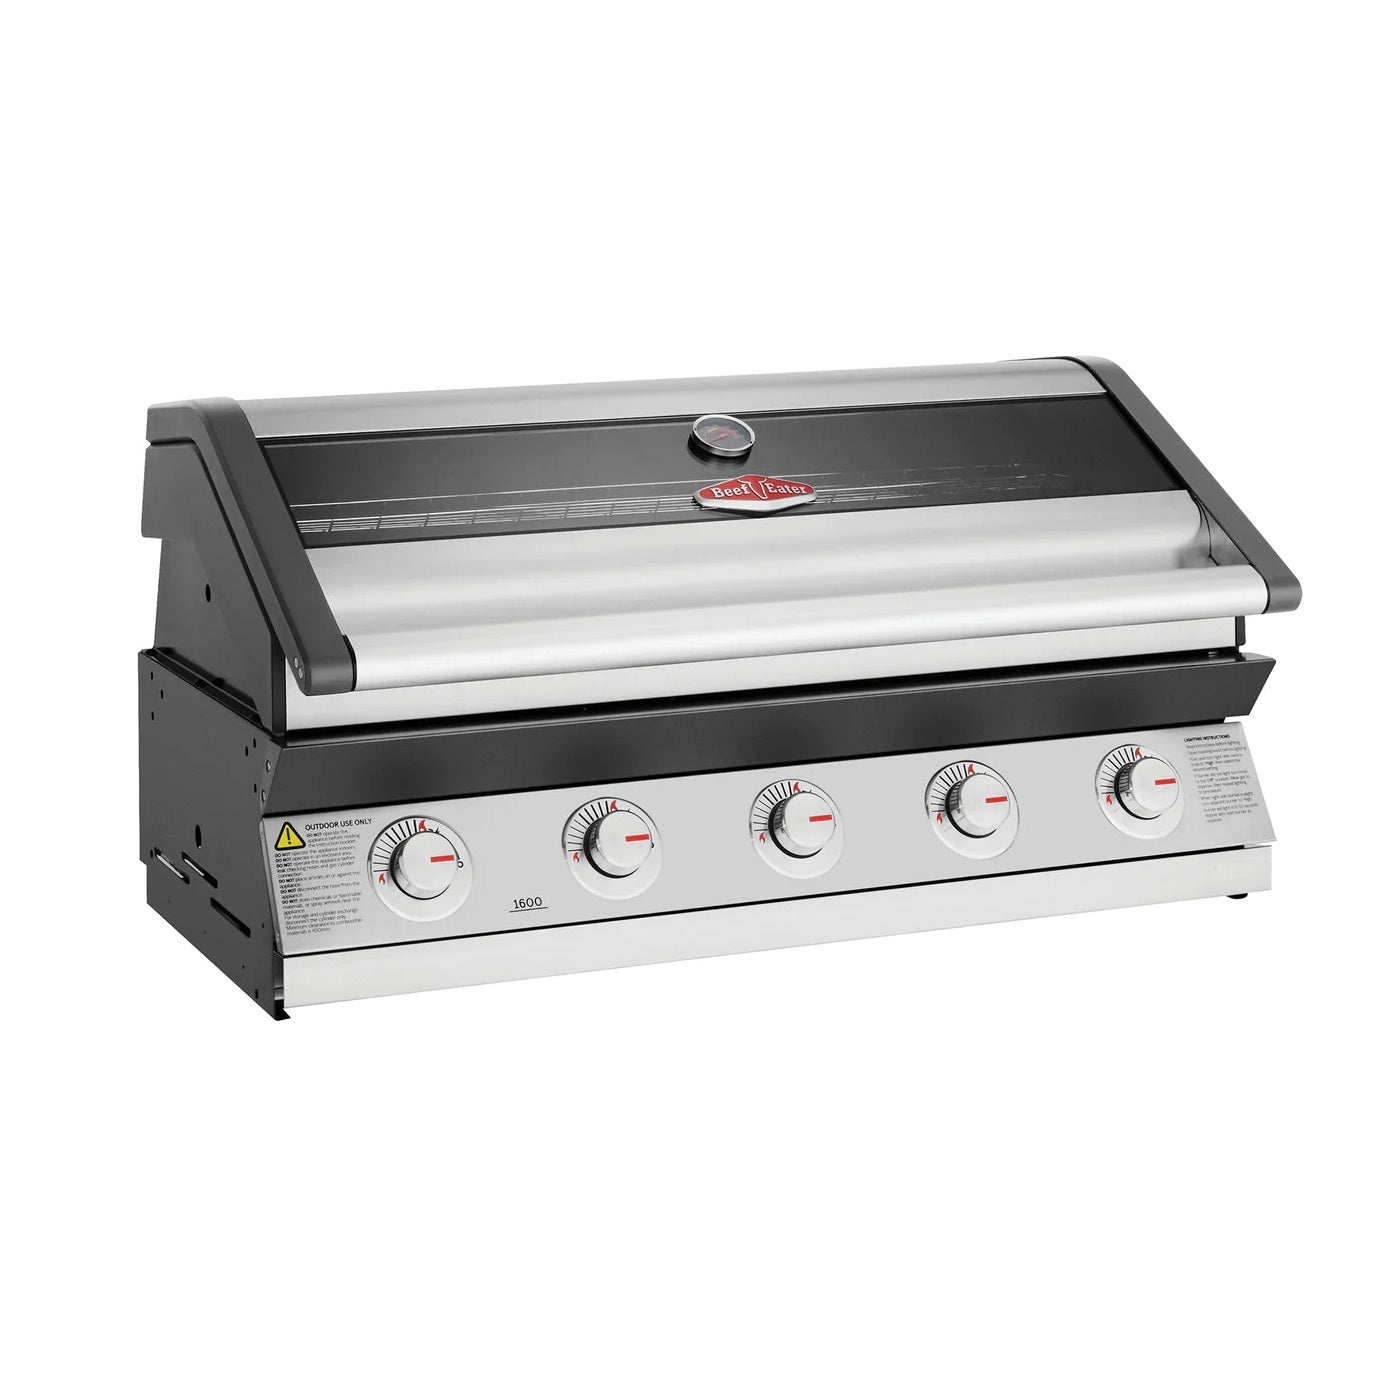 BeefEater 1600S Series - 5 Bnr BBQ Only